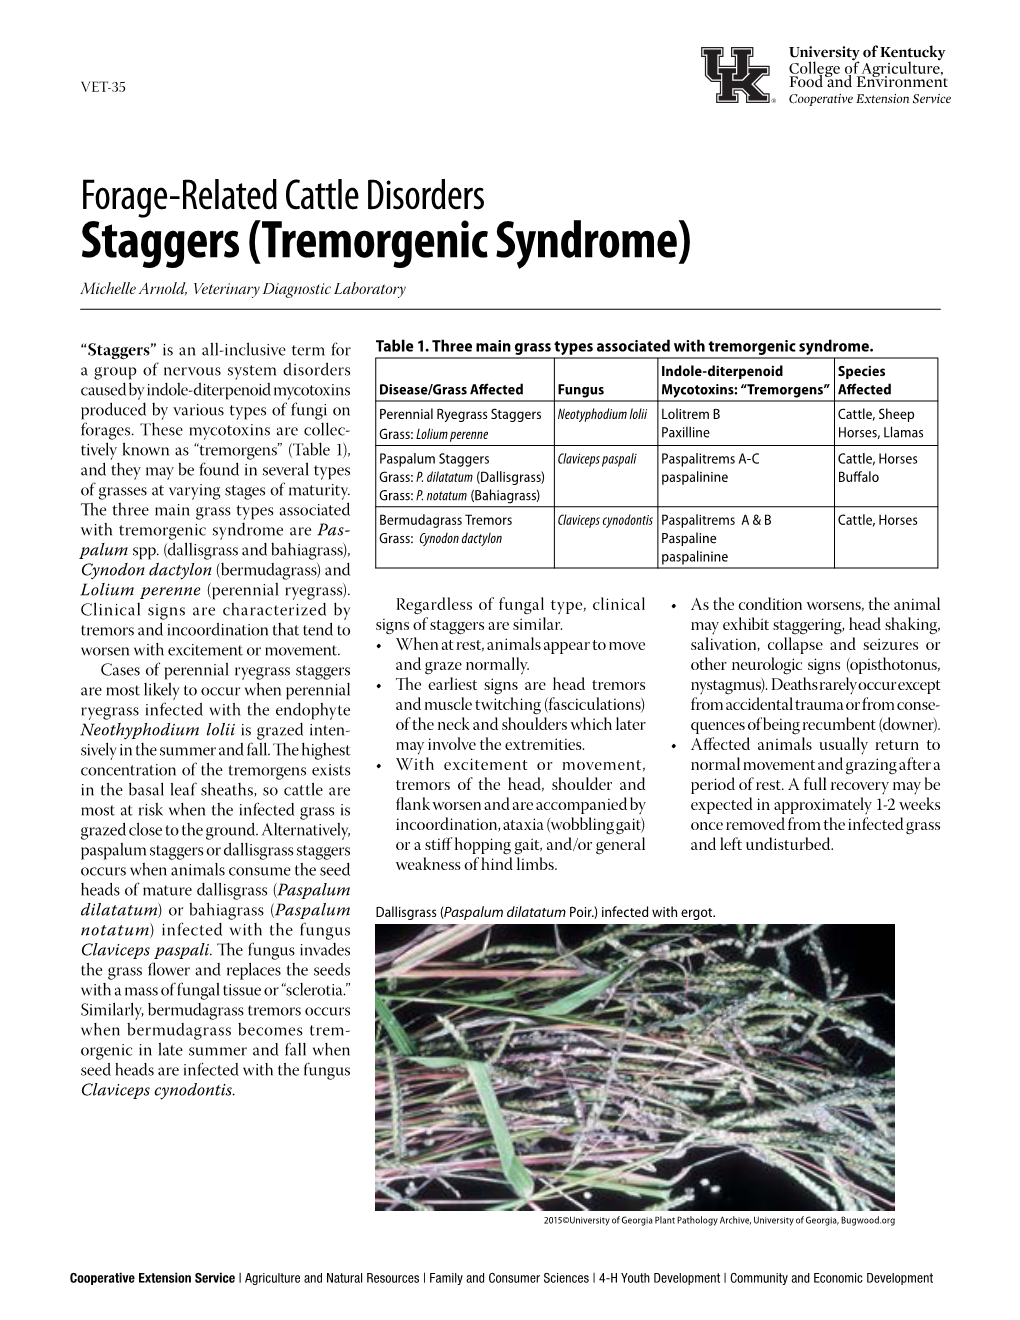 VET-35: Staggers (Tremorgenic Syndrome)